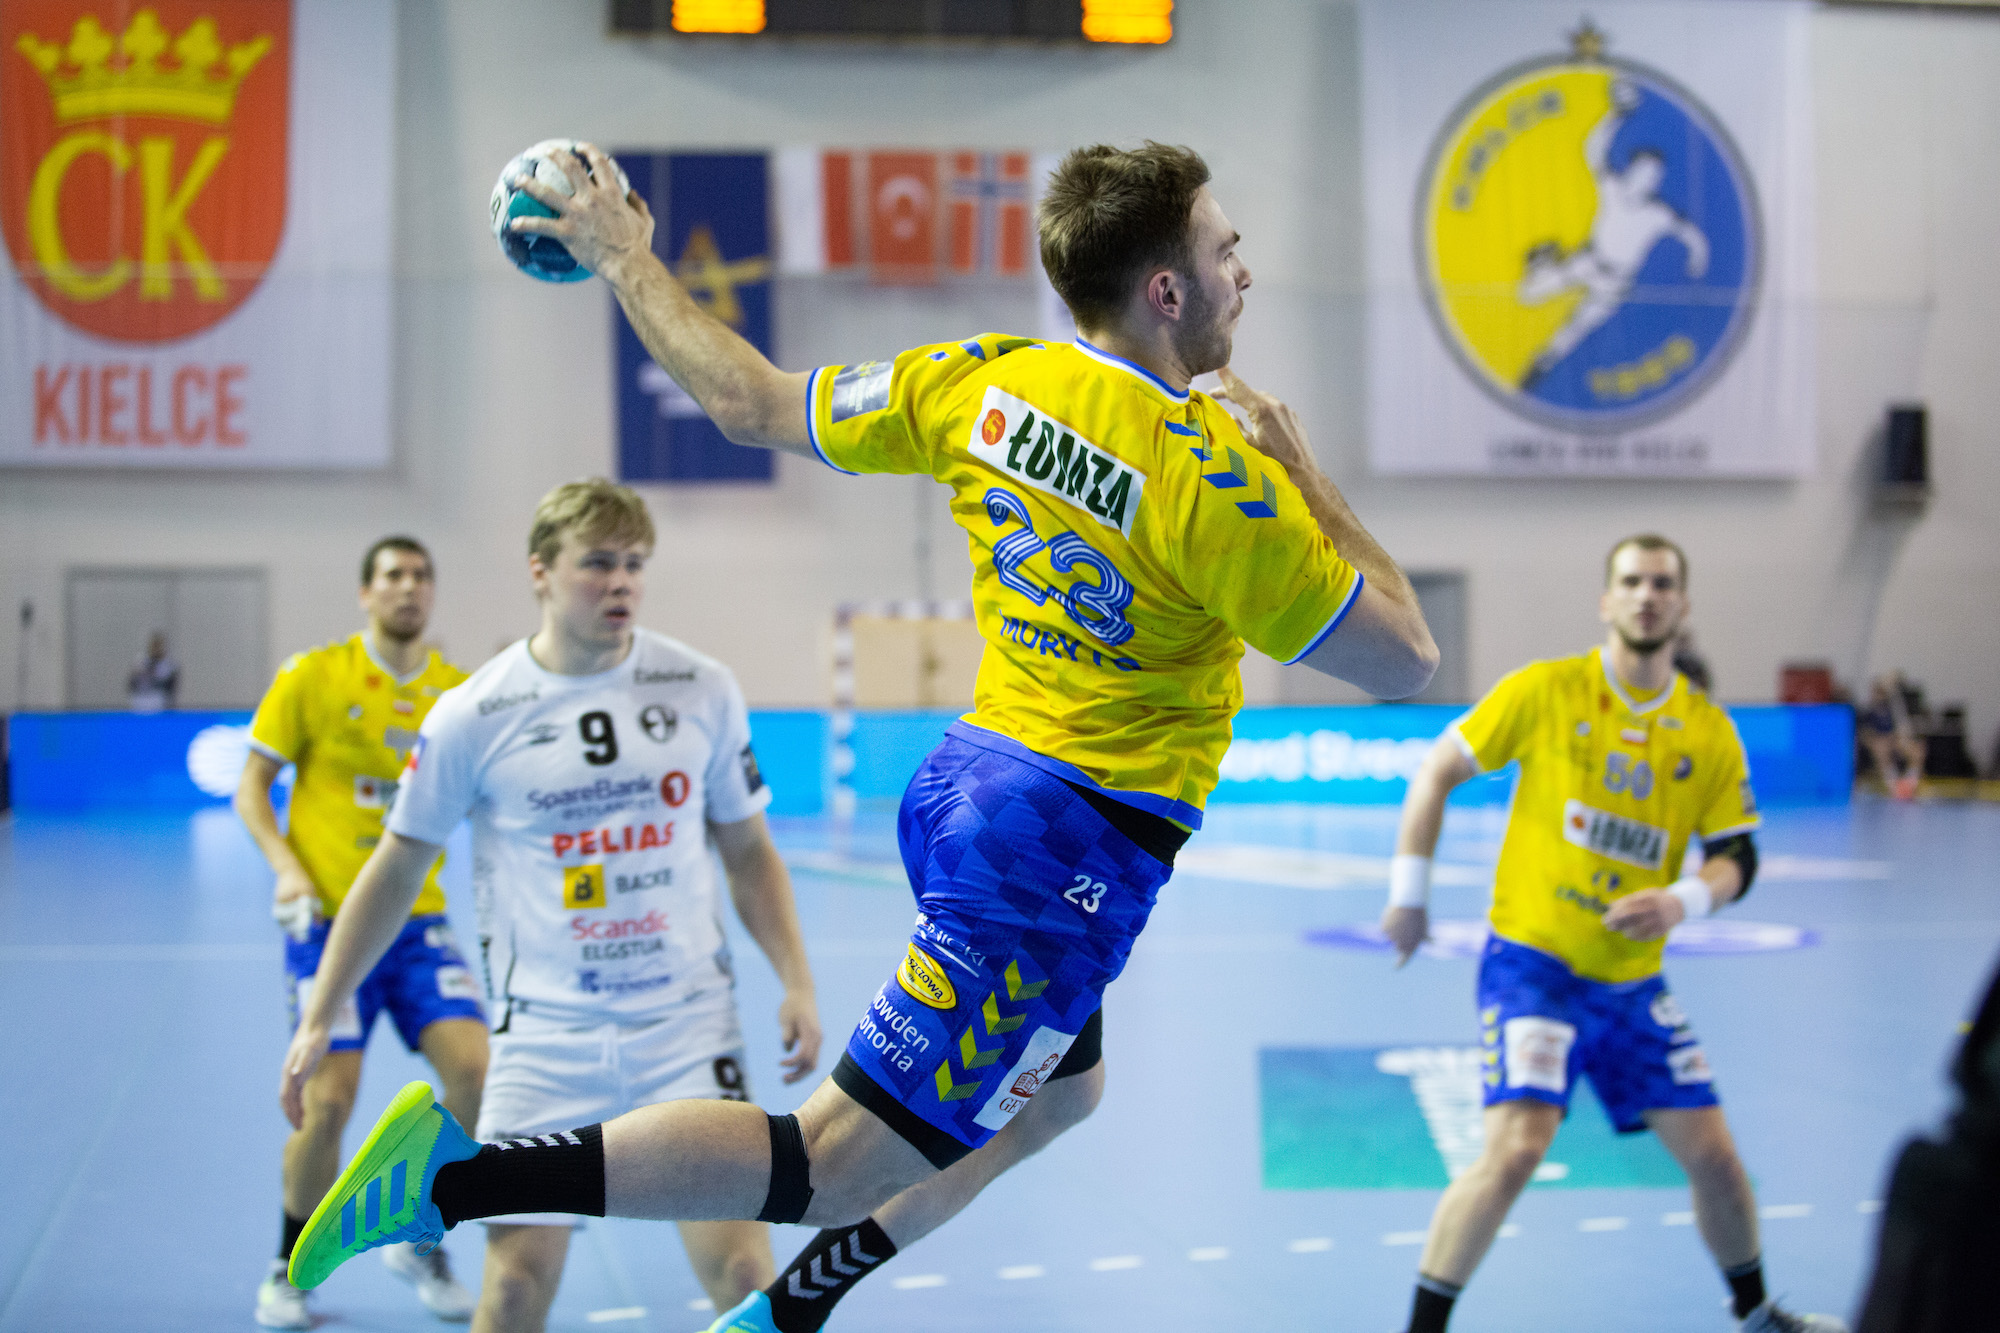 Kielce and Flensburg duel for group win in MOTW